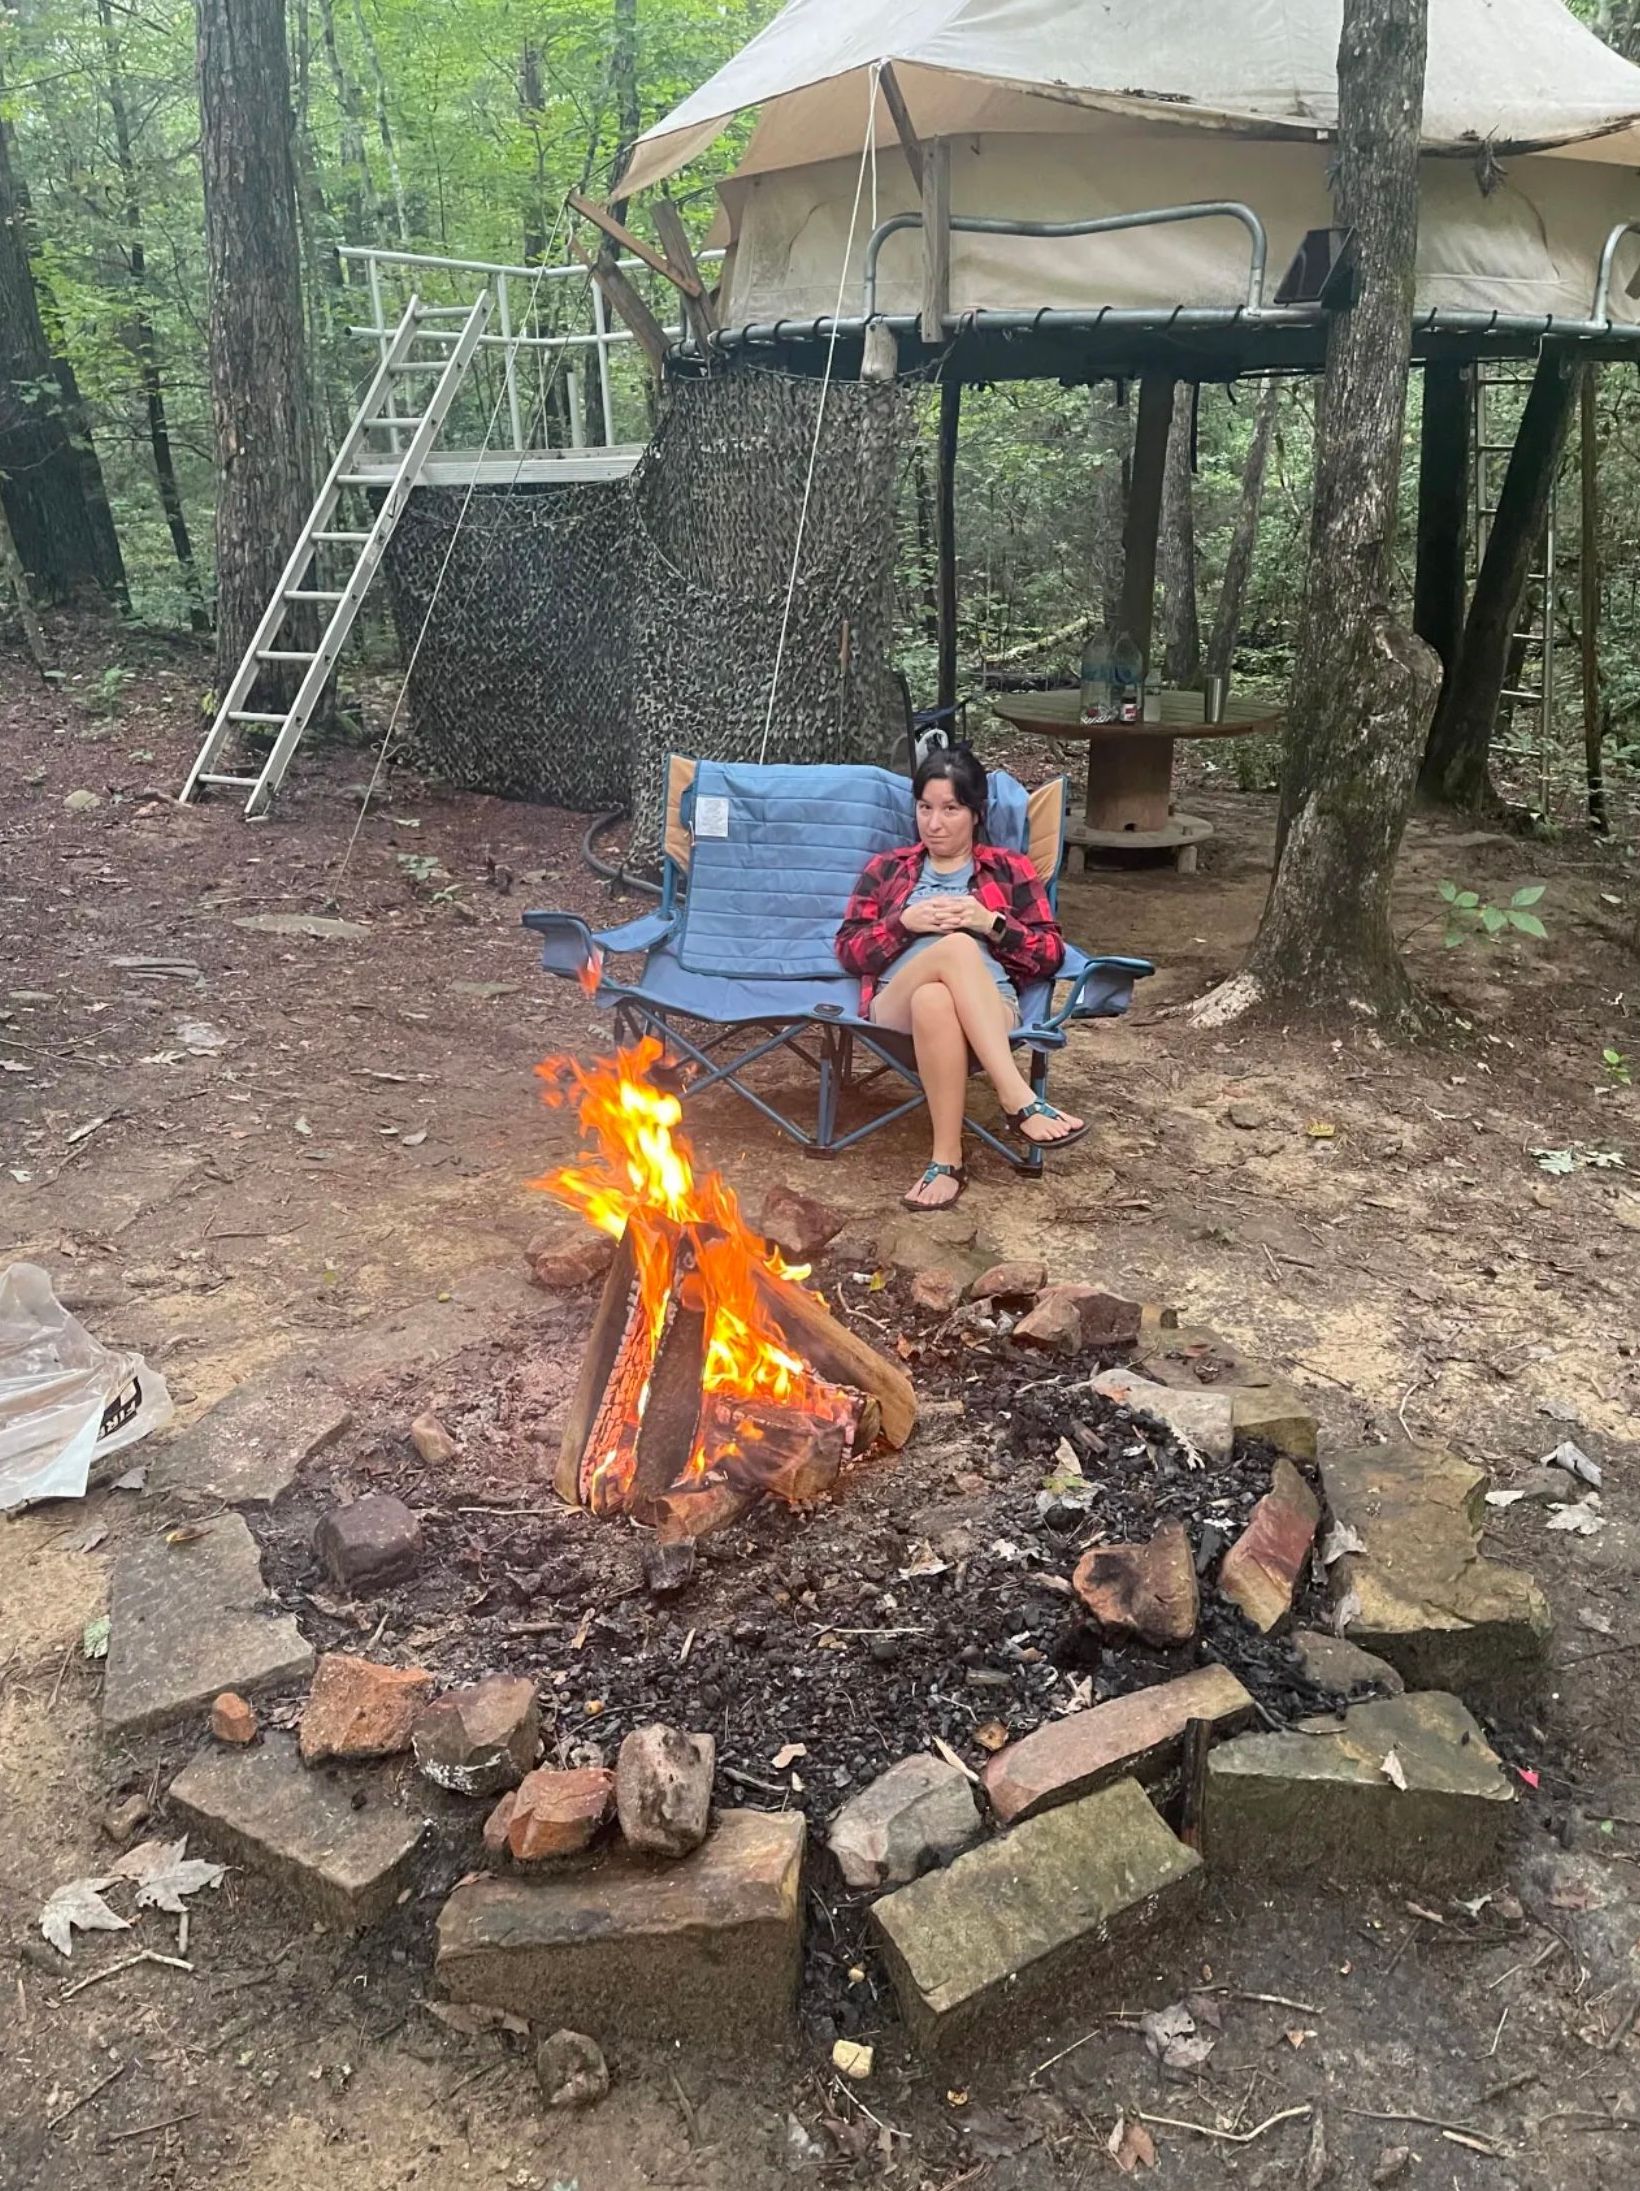 A woman is sitting in a chair next to a campfire in the woods.